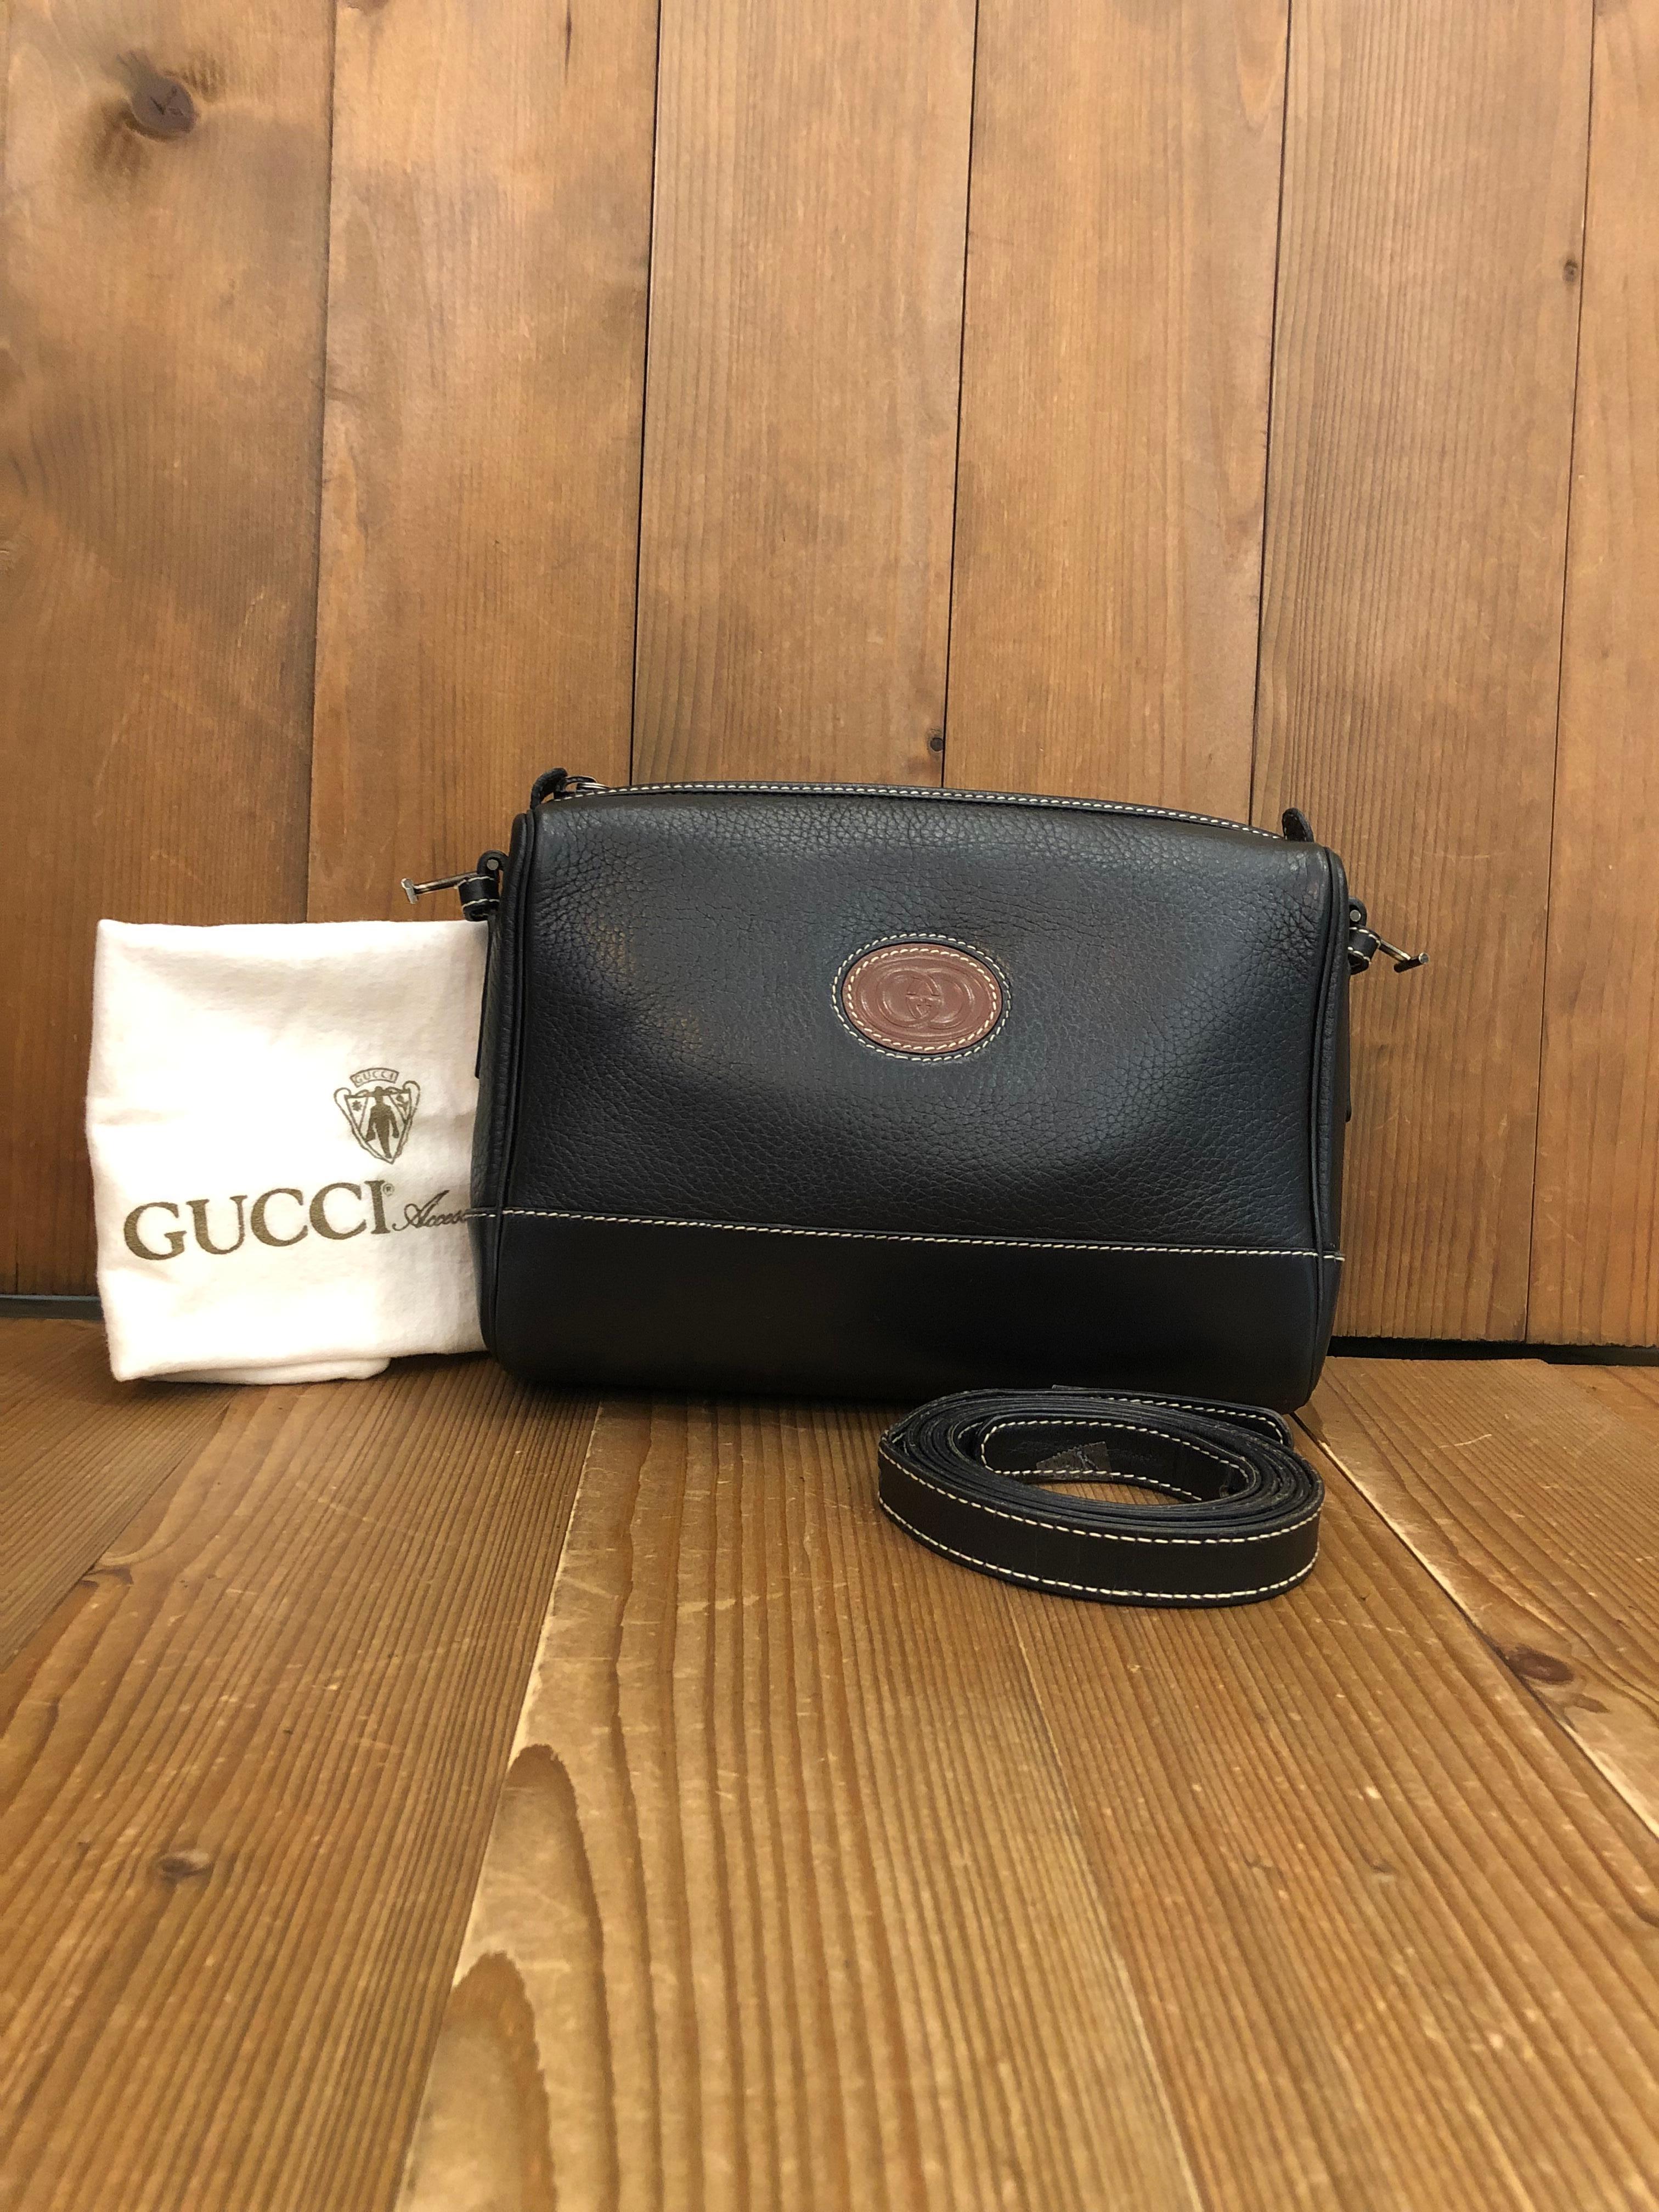 1980s Gucci small crossbody bag in black leather featuring black toned hardware and  all black suede leather interior. This compact crossbody bag has one interior zip pocket. Top zip closure. Made in Italy. Measures approximately 8.25 x 6 x 2.5